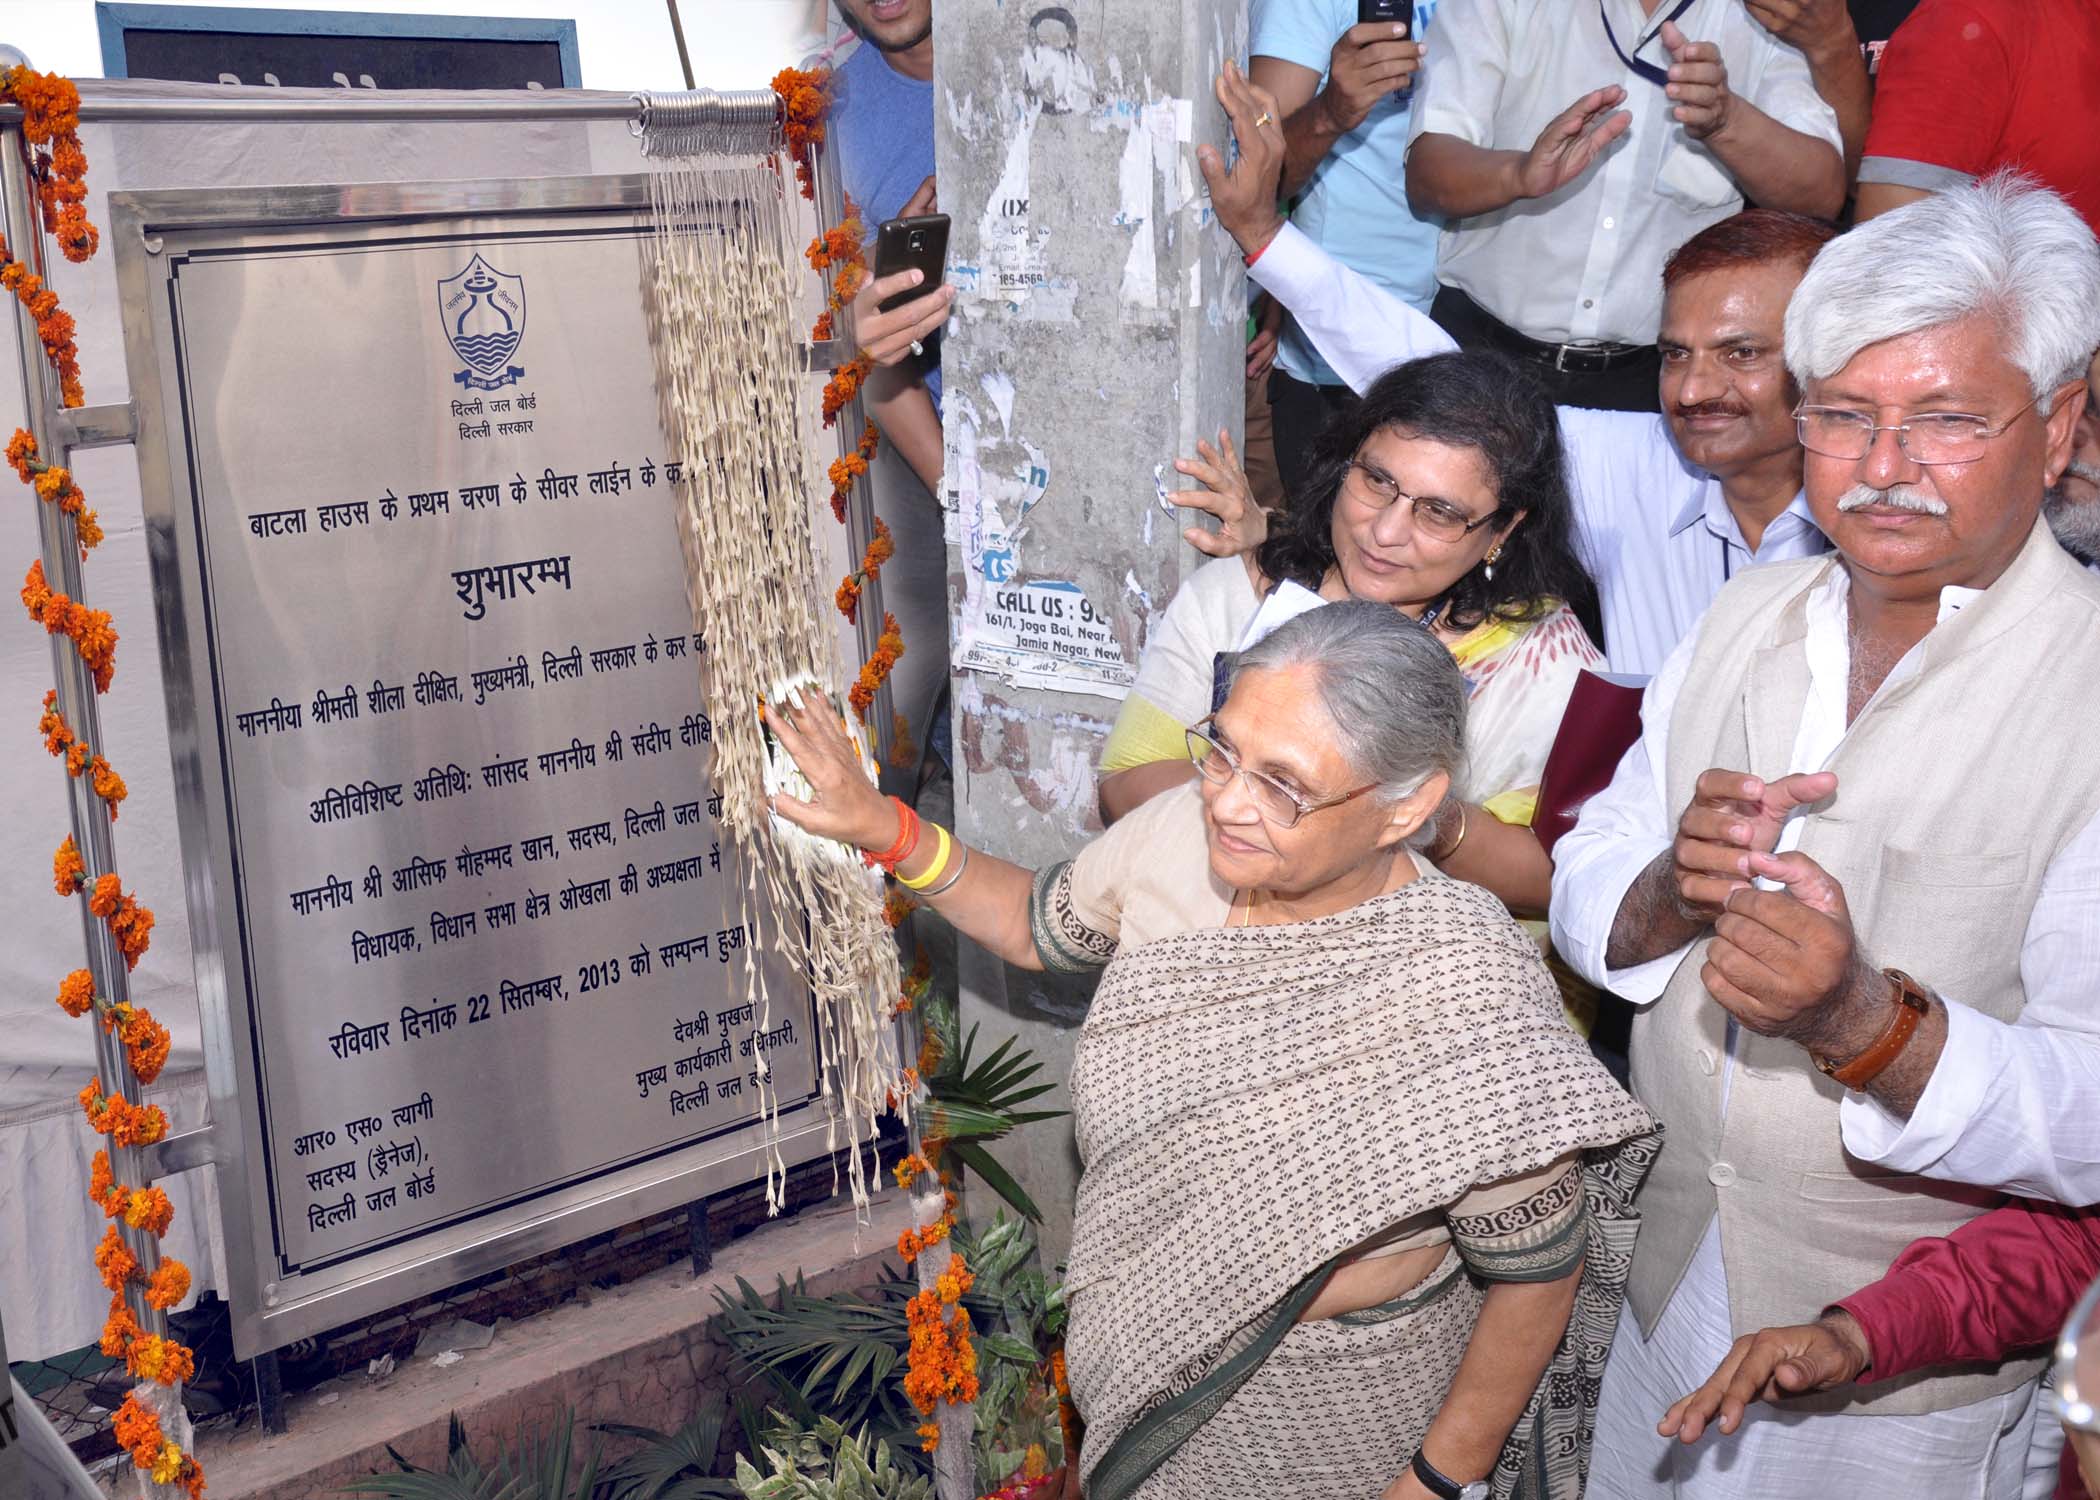 Sheila Dikshit,Chief Minister of Delhi and Chairperson, Delhi Jal Board, inaugurates the...